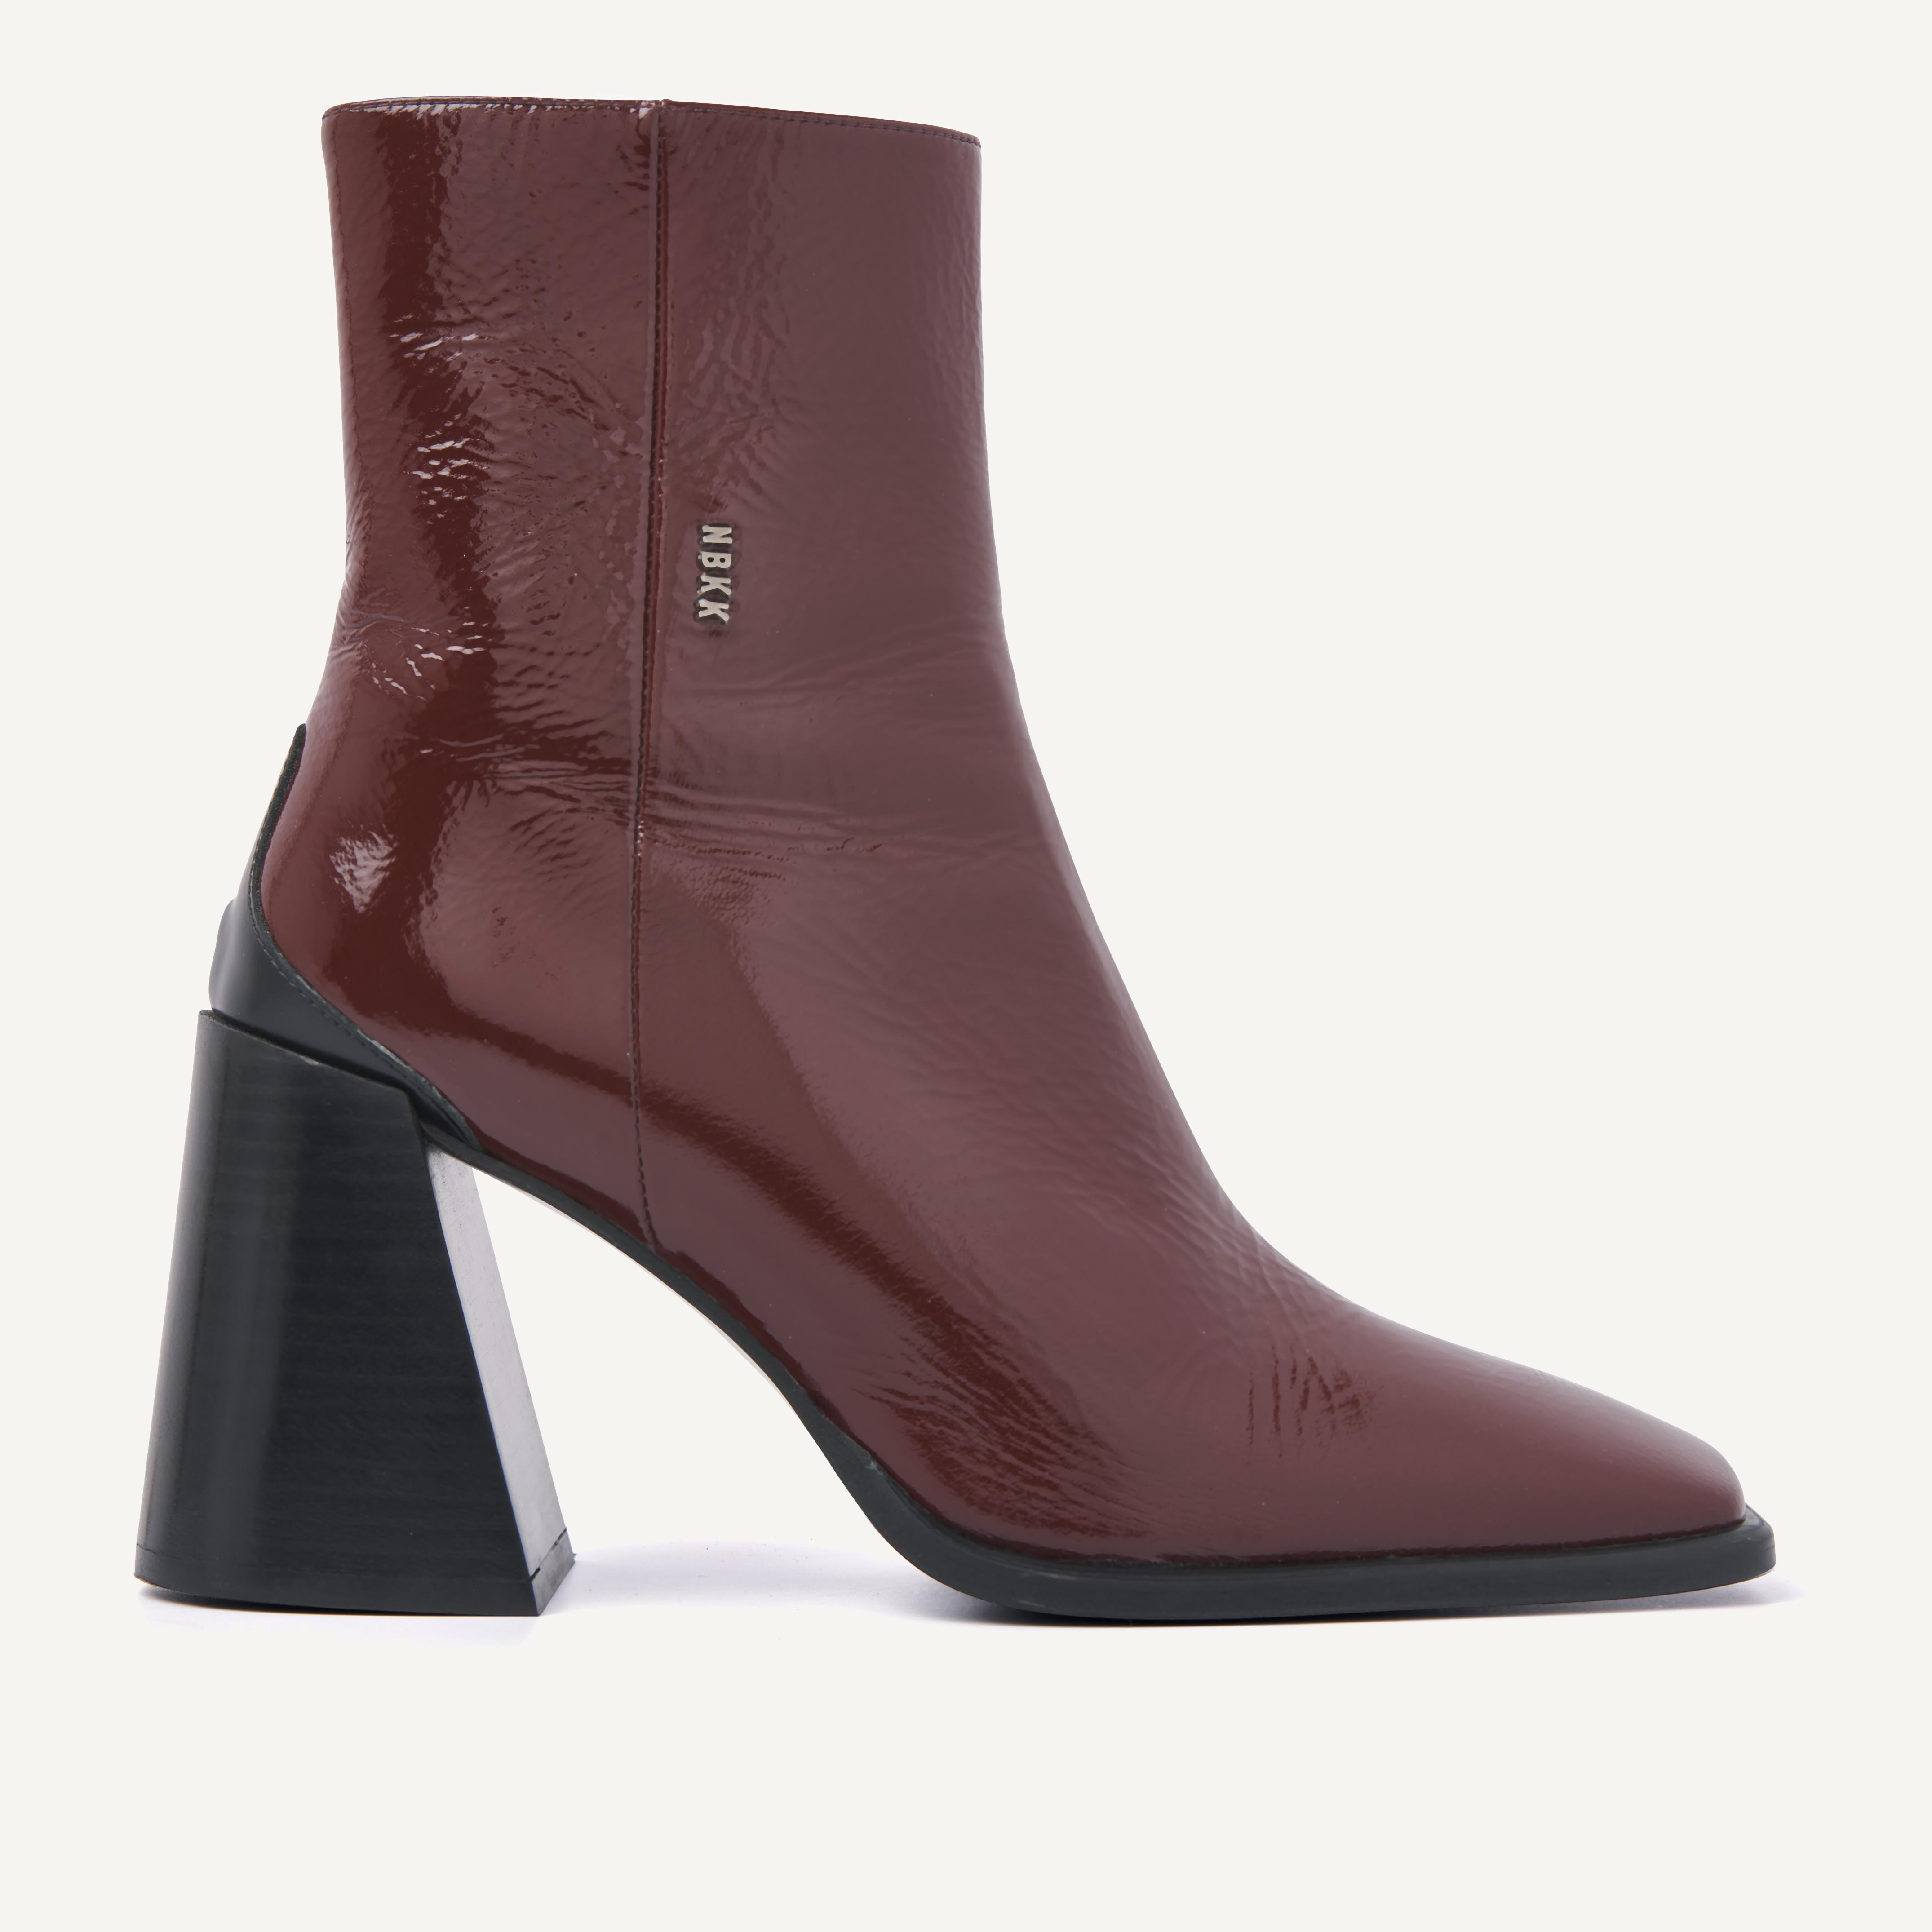 Lana Pilar | Brown Ankle Boots for Women